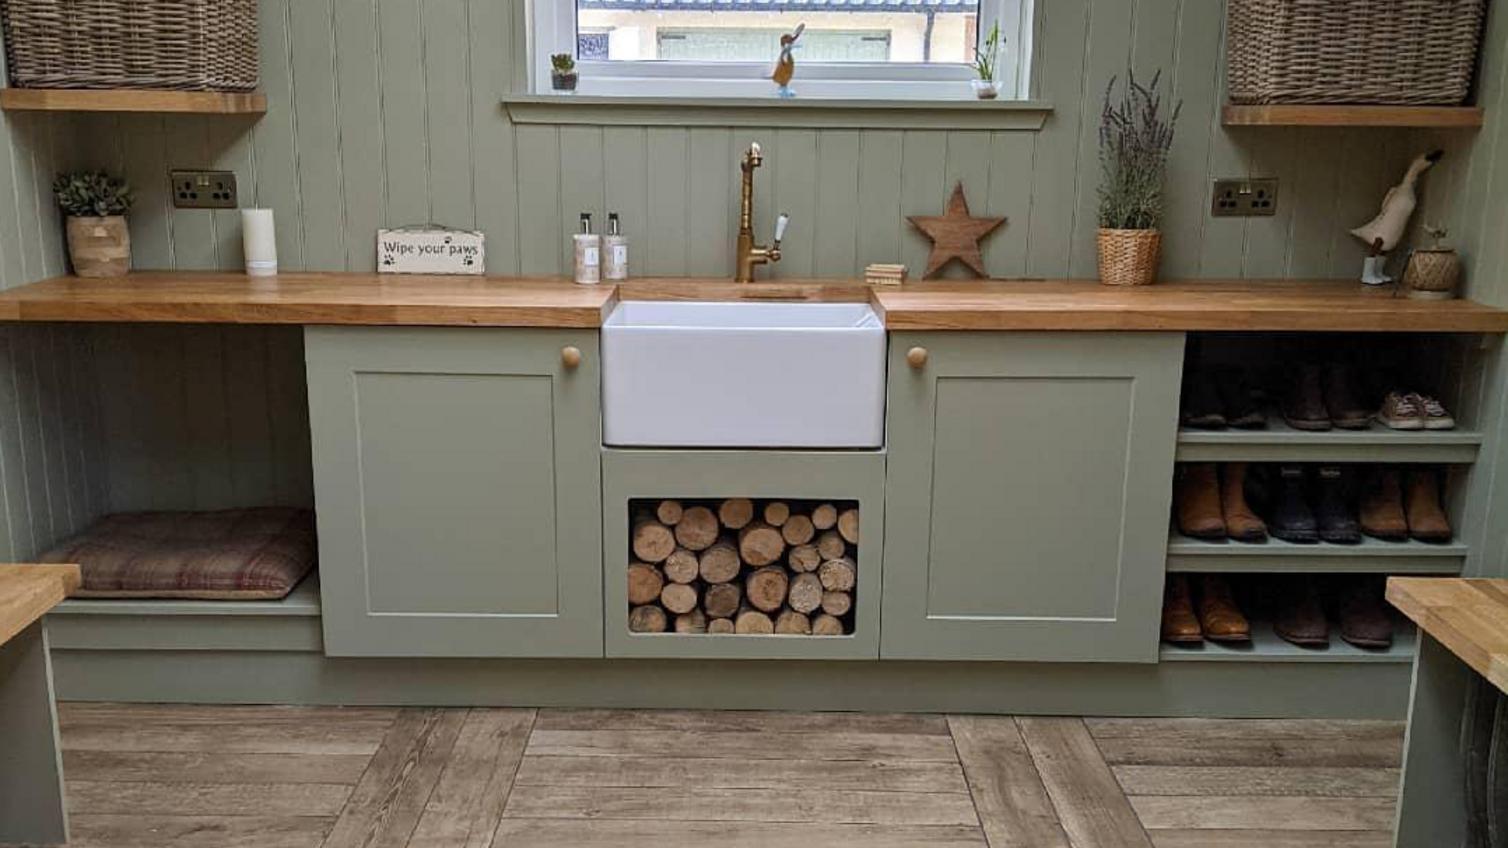 Green Belfast sink cabinets used as a boot room storage idea for shoe shelves and storing firewood.